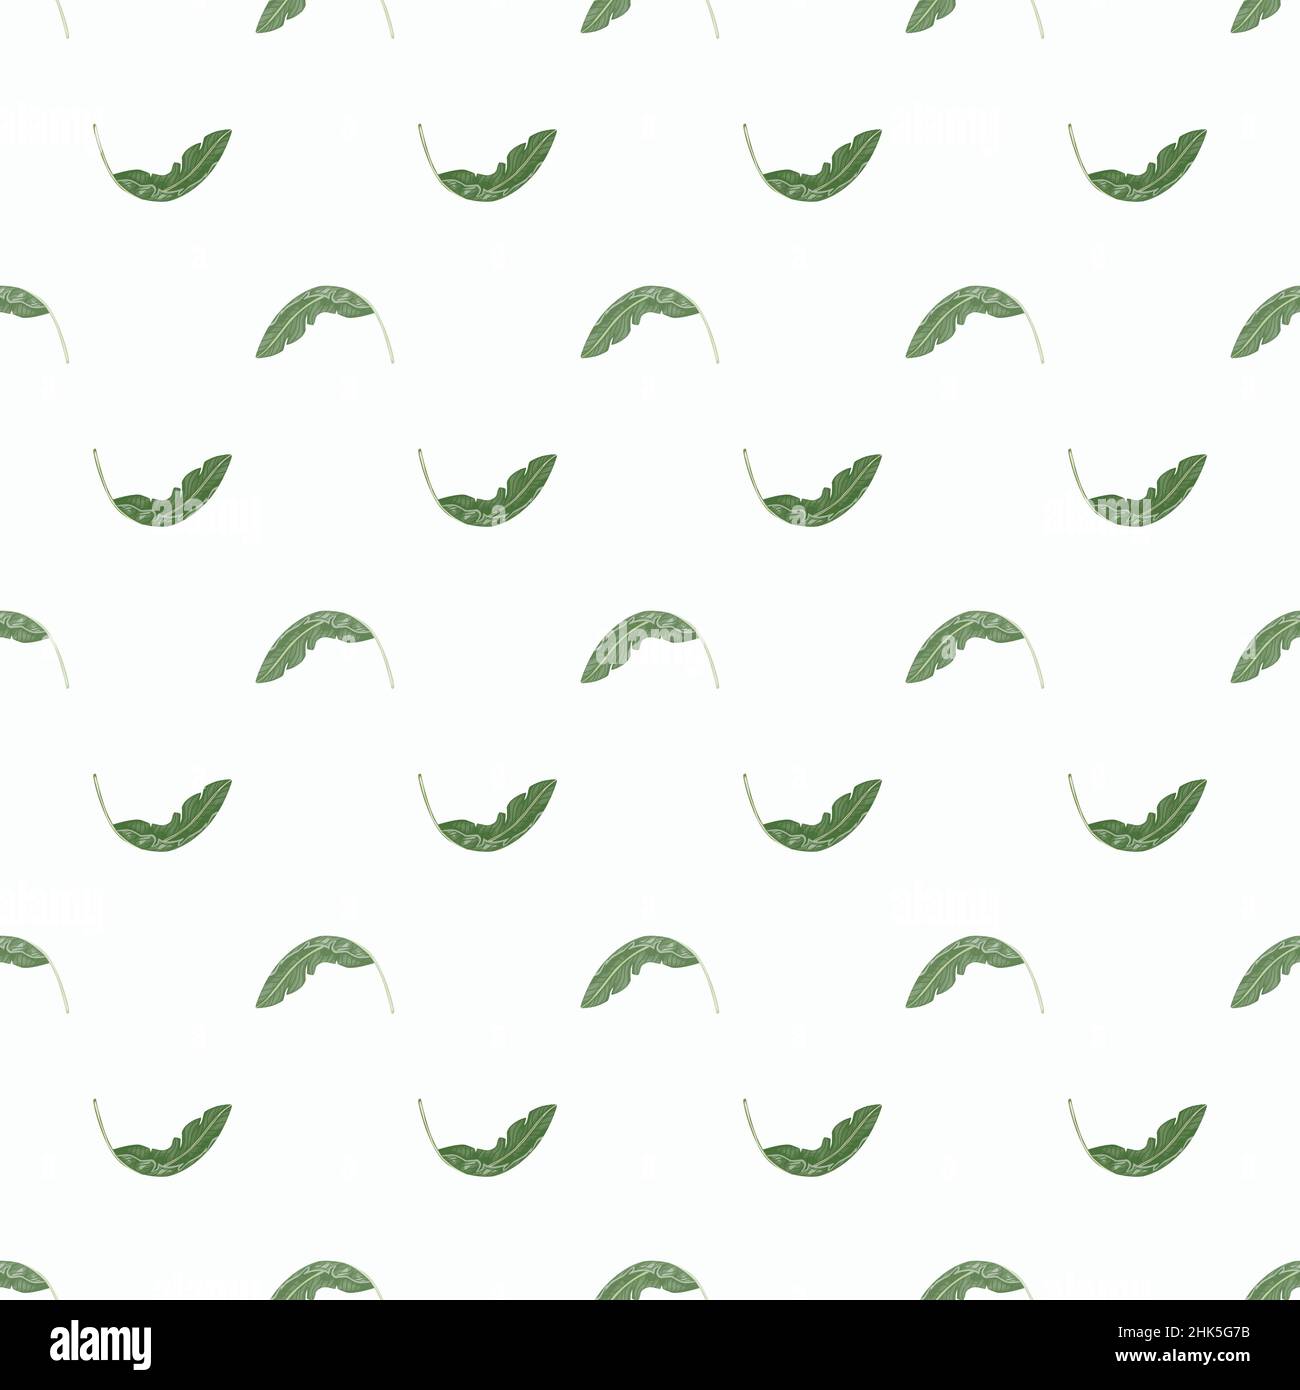 Abstract seamless pattern with small banana leaf shapes. Light background. Vector illustration for seasonal textile prints, fabric, banners, backdrops Stock Vector